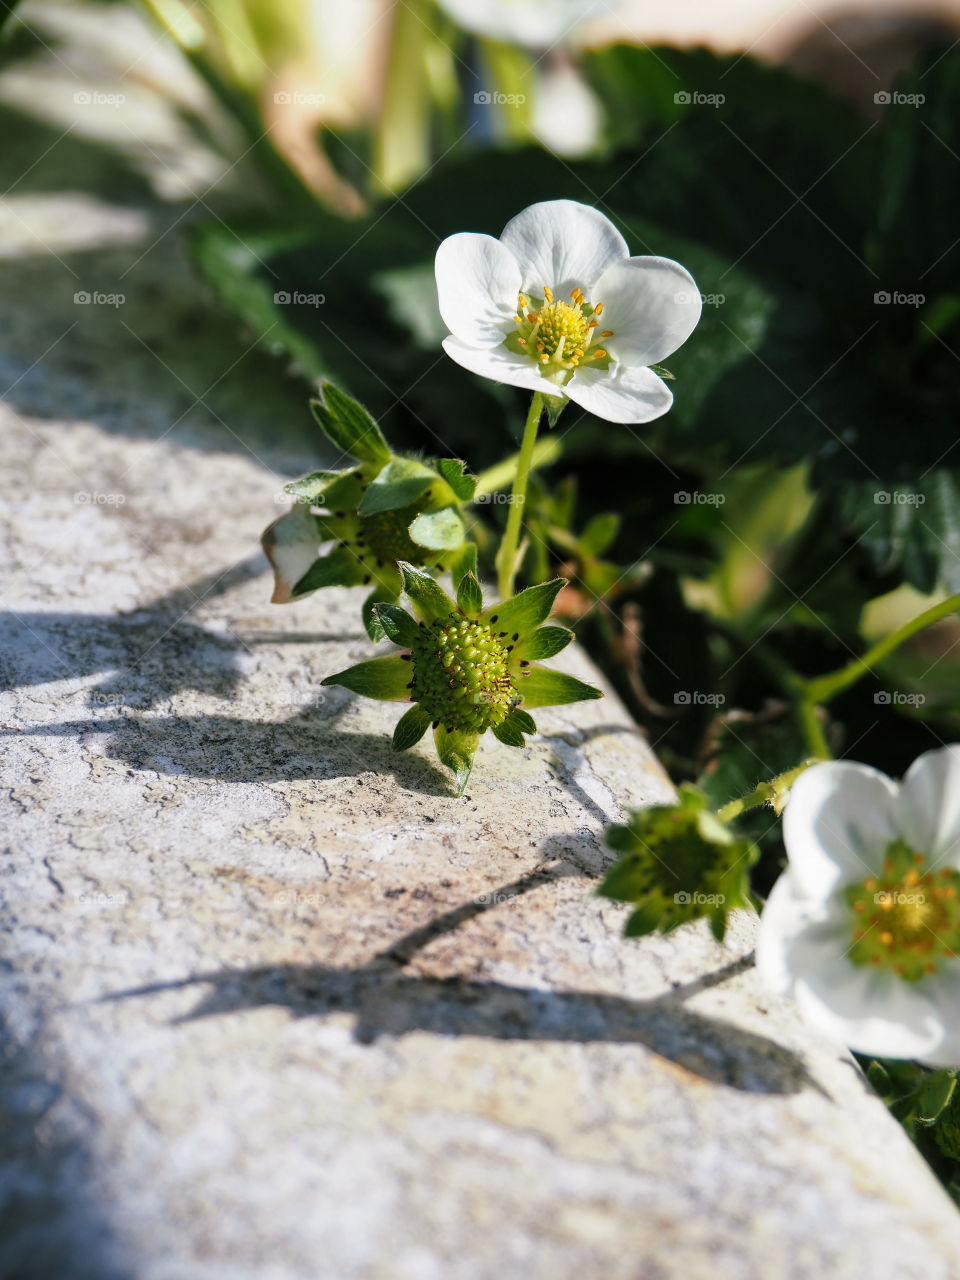 Growing strawberries with strawberry flower 